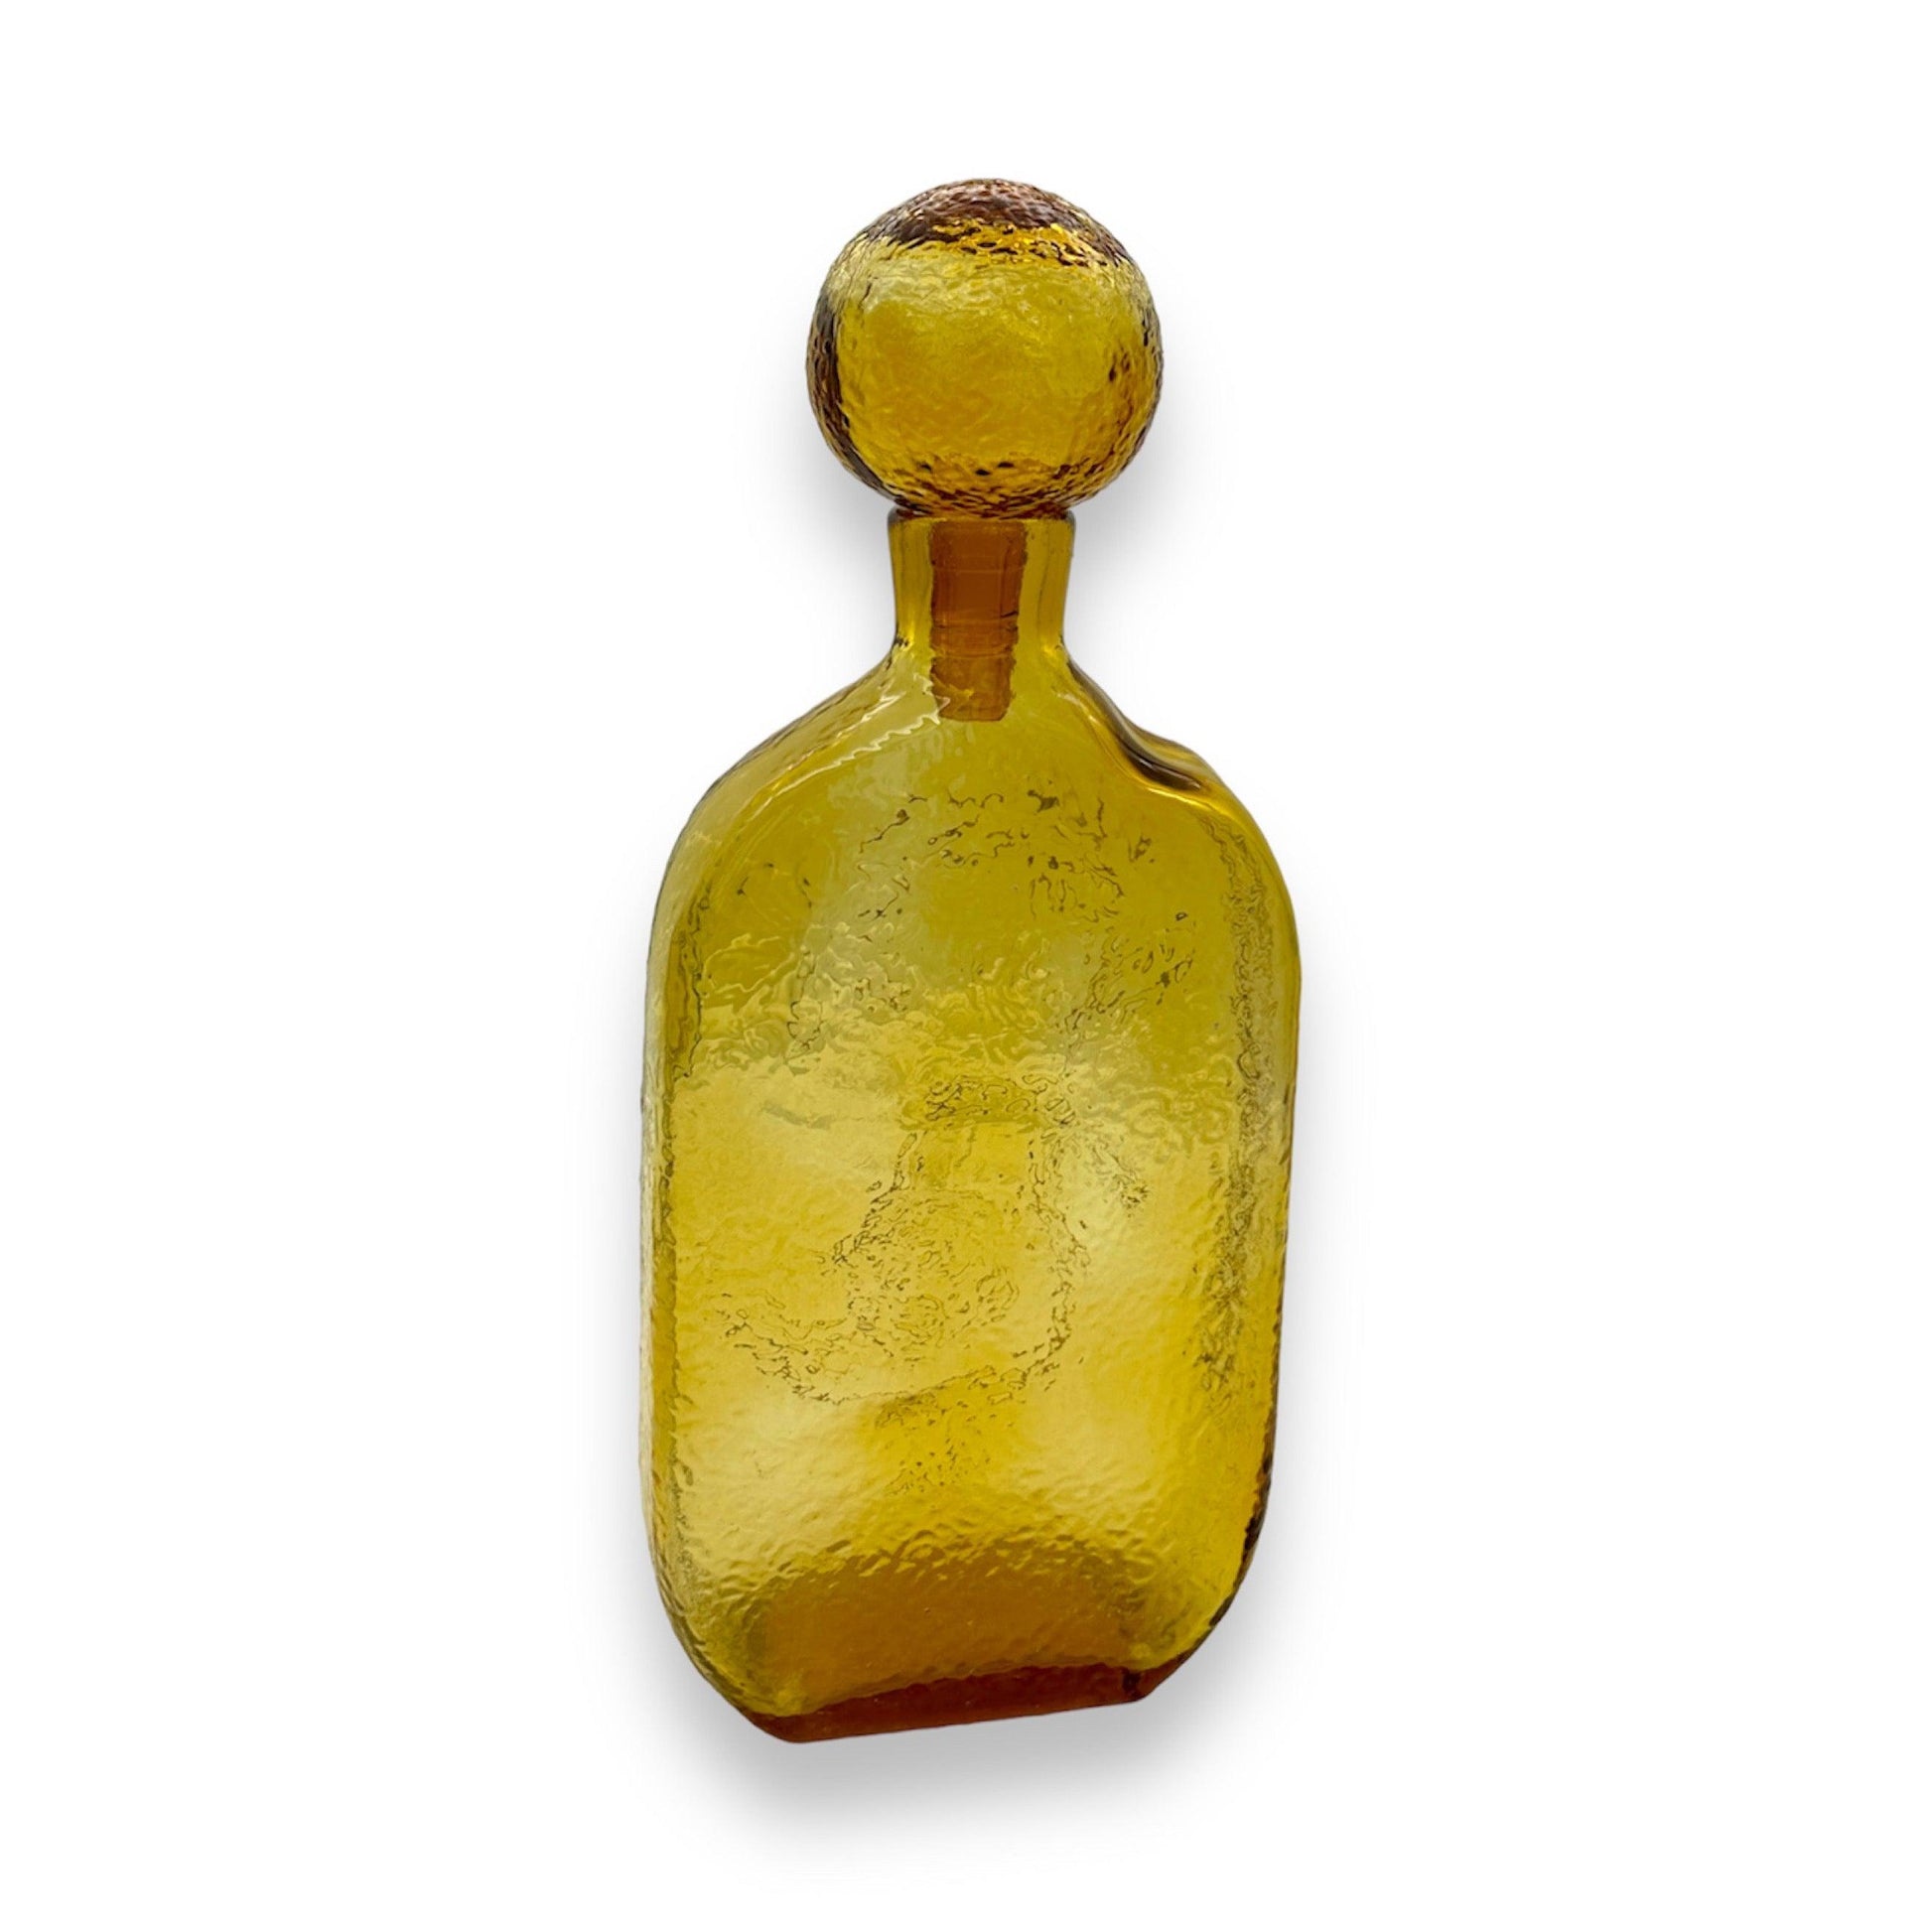 Empoli Glass Decanter from Italy - Shop Now